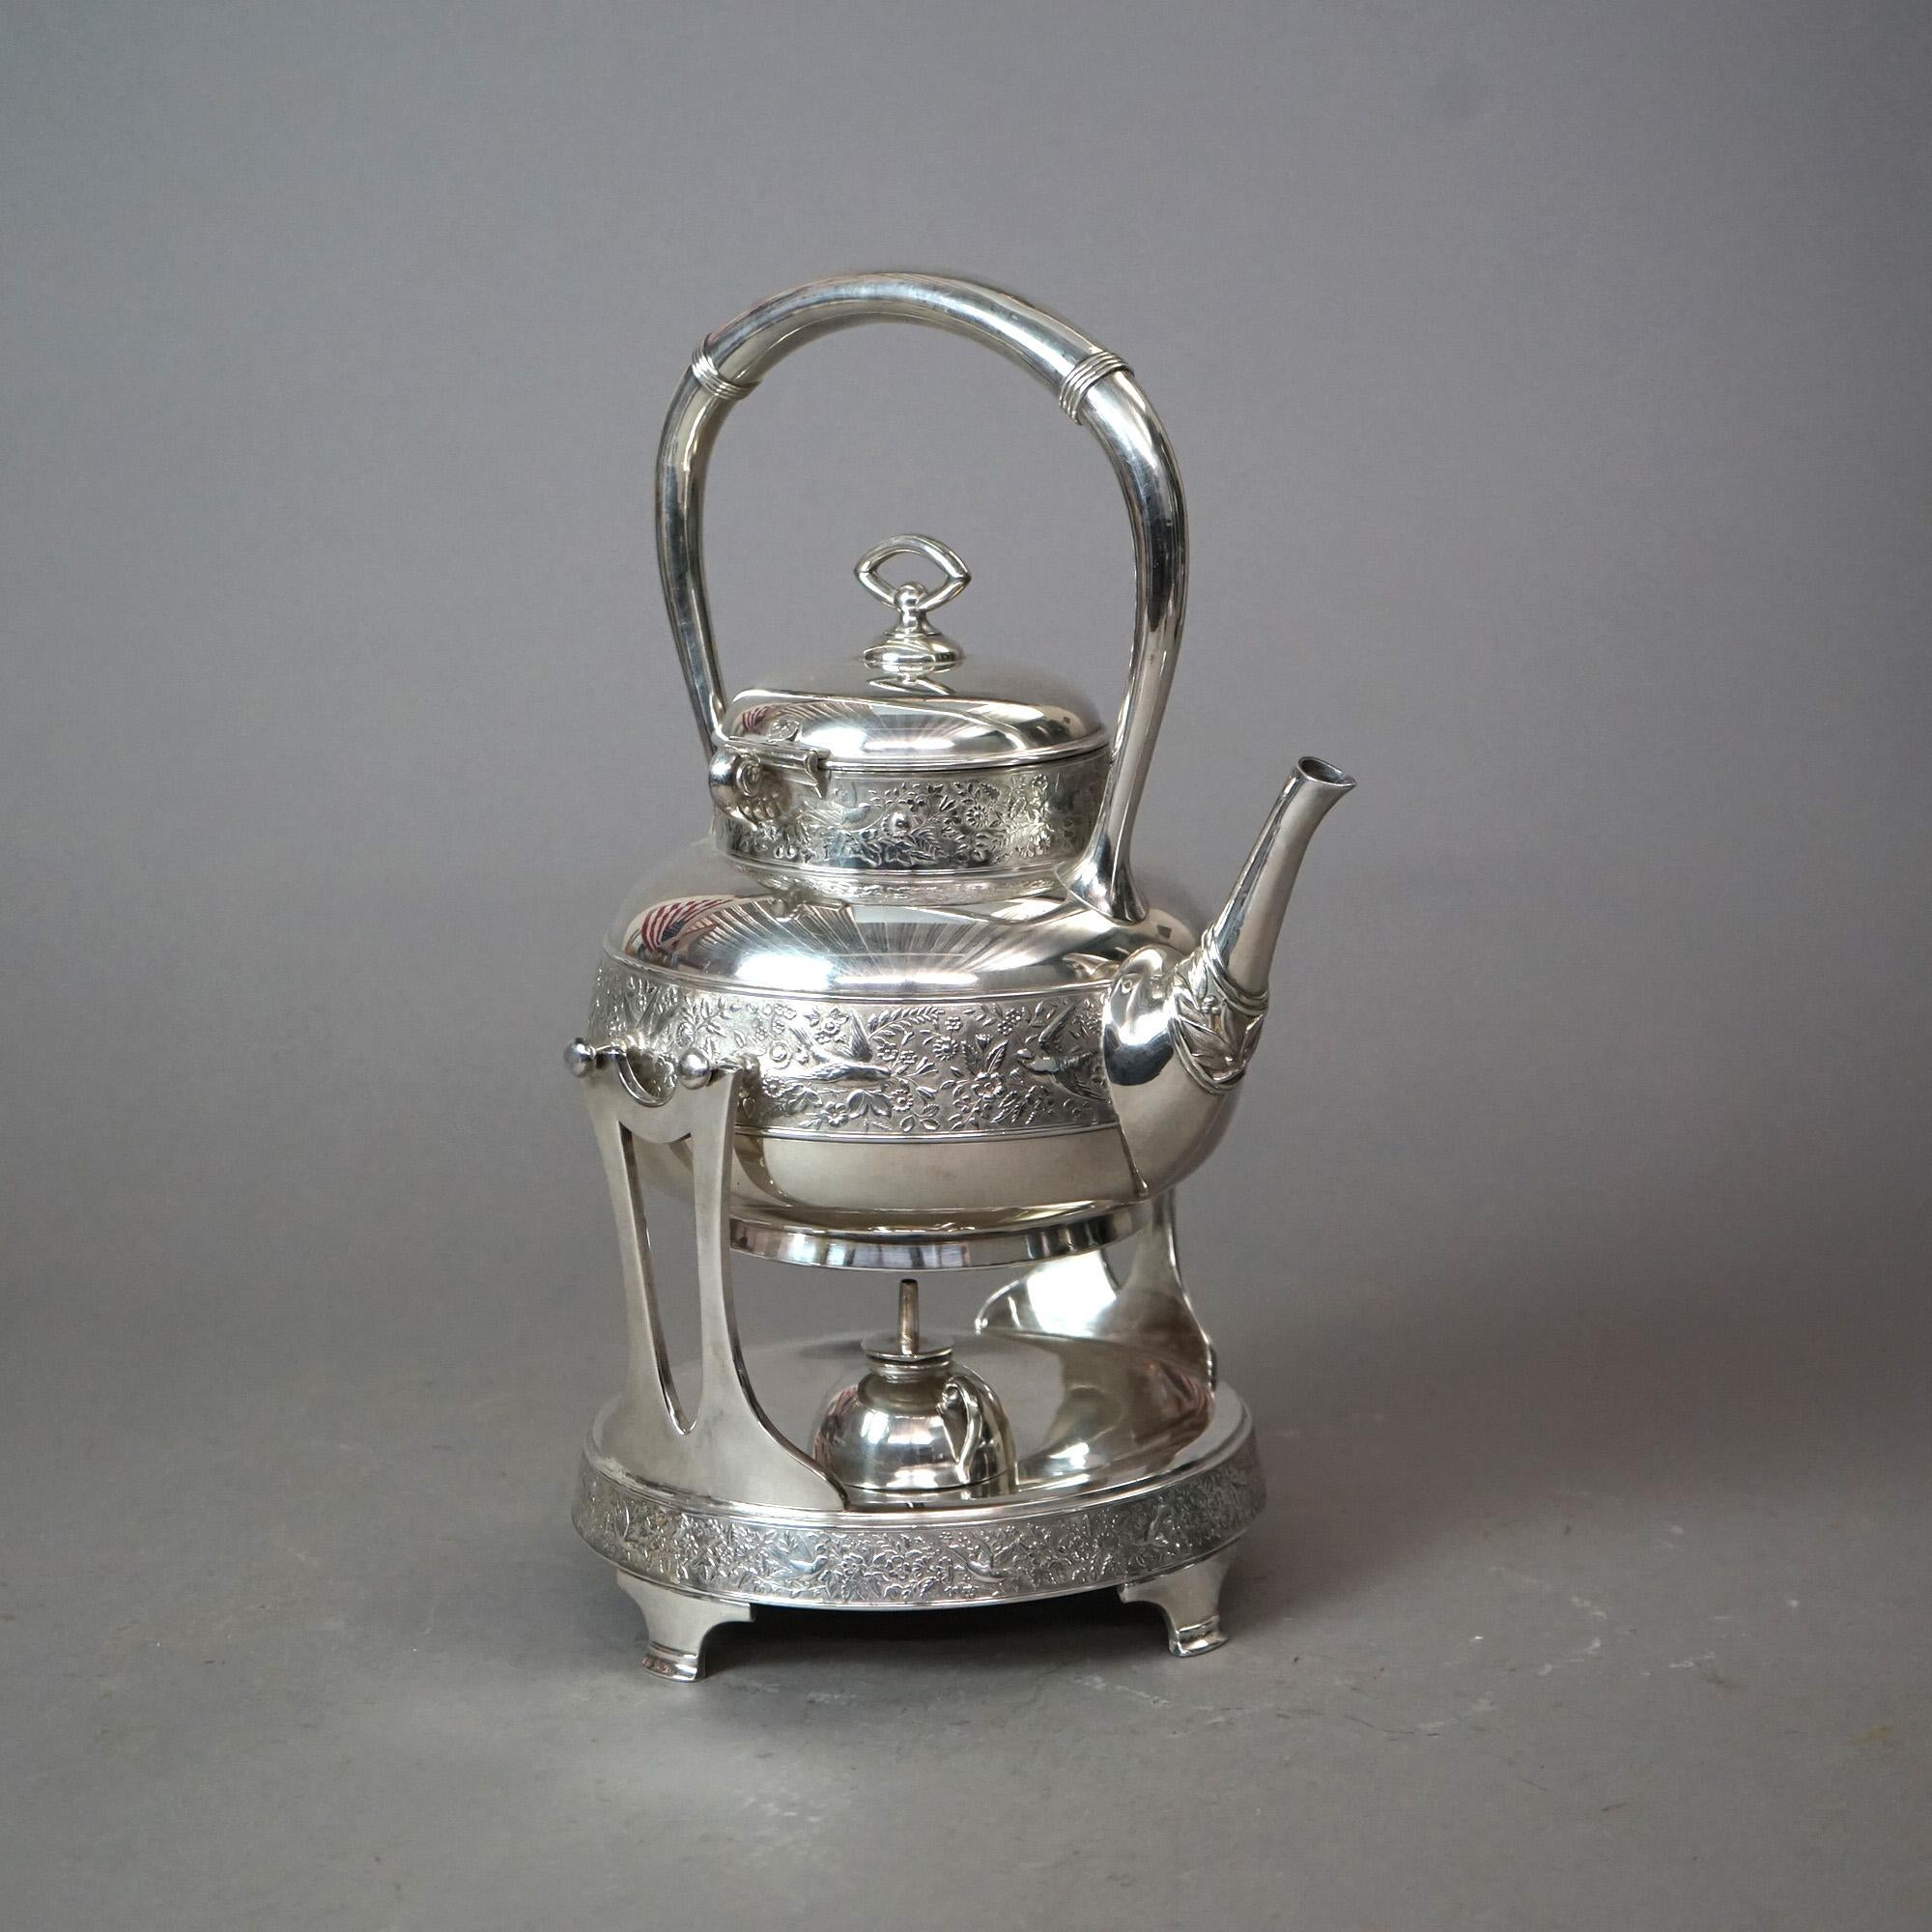 Aesthetic Movement Antique Rogers Aesthetic Silver Plated Tilting Teapot & Stand with Birds C1870